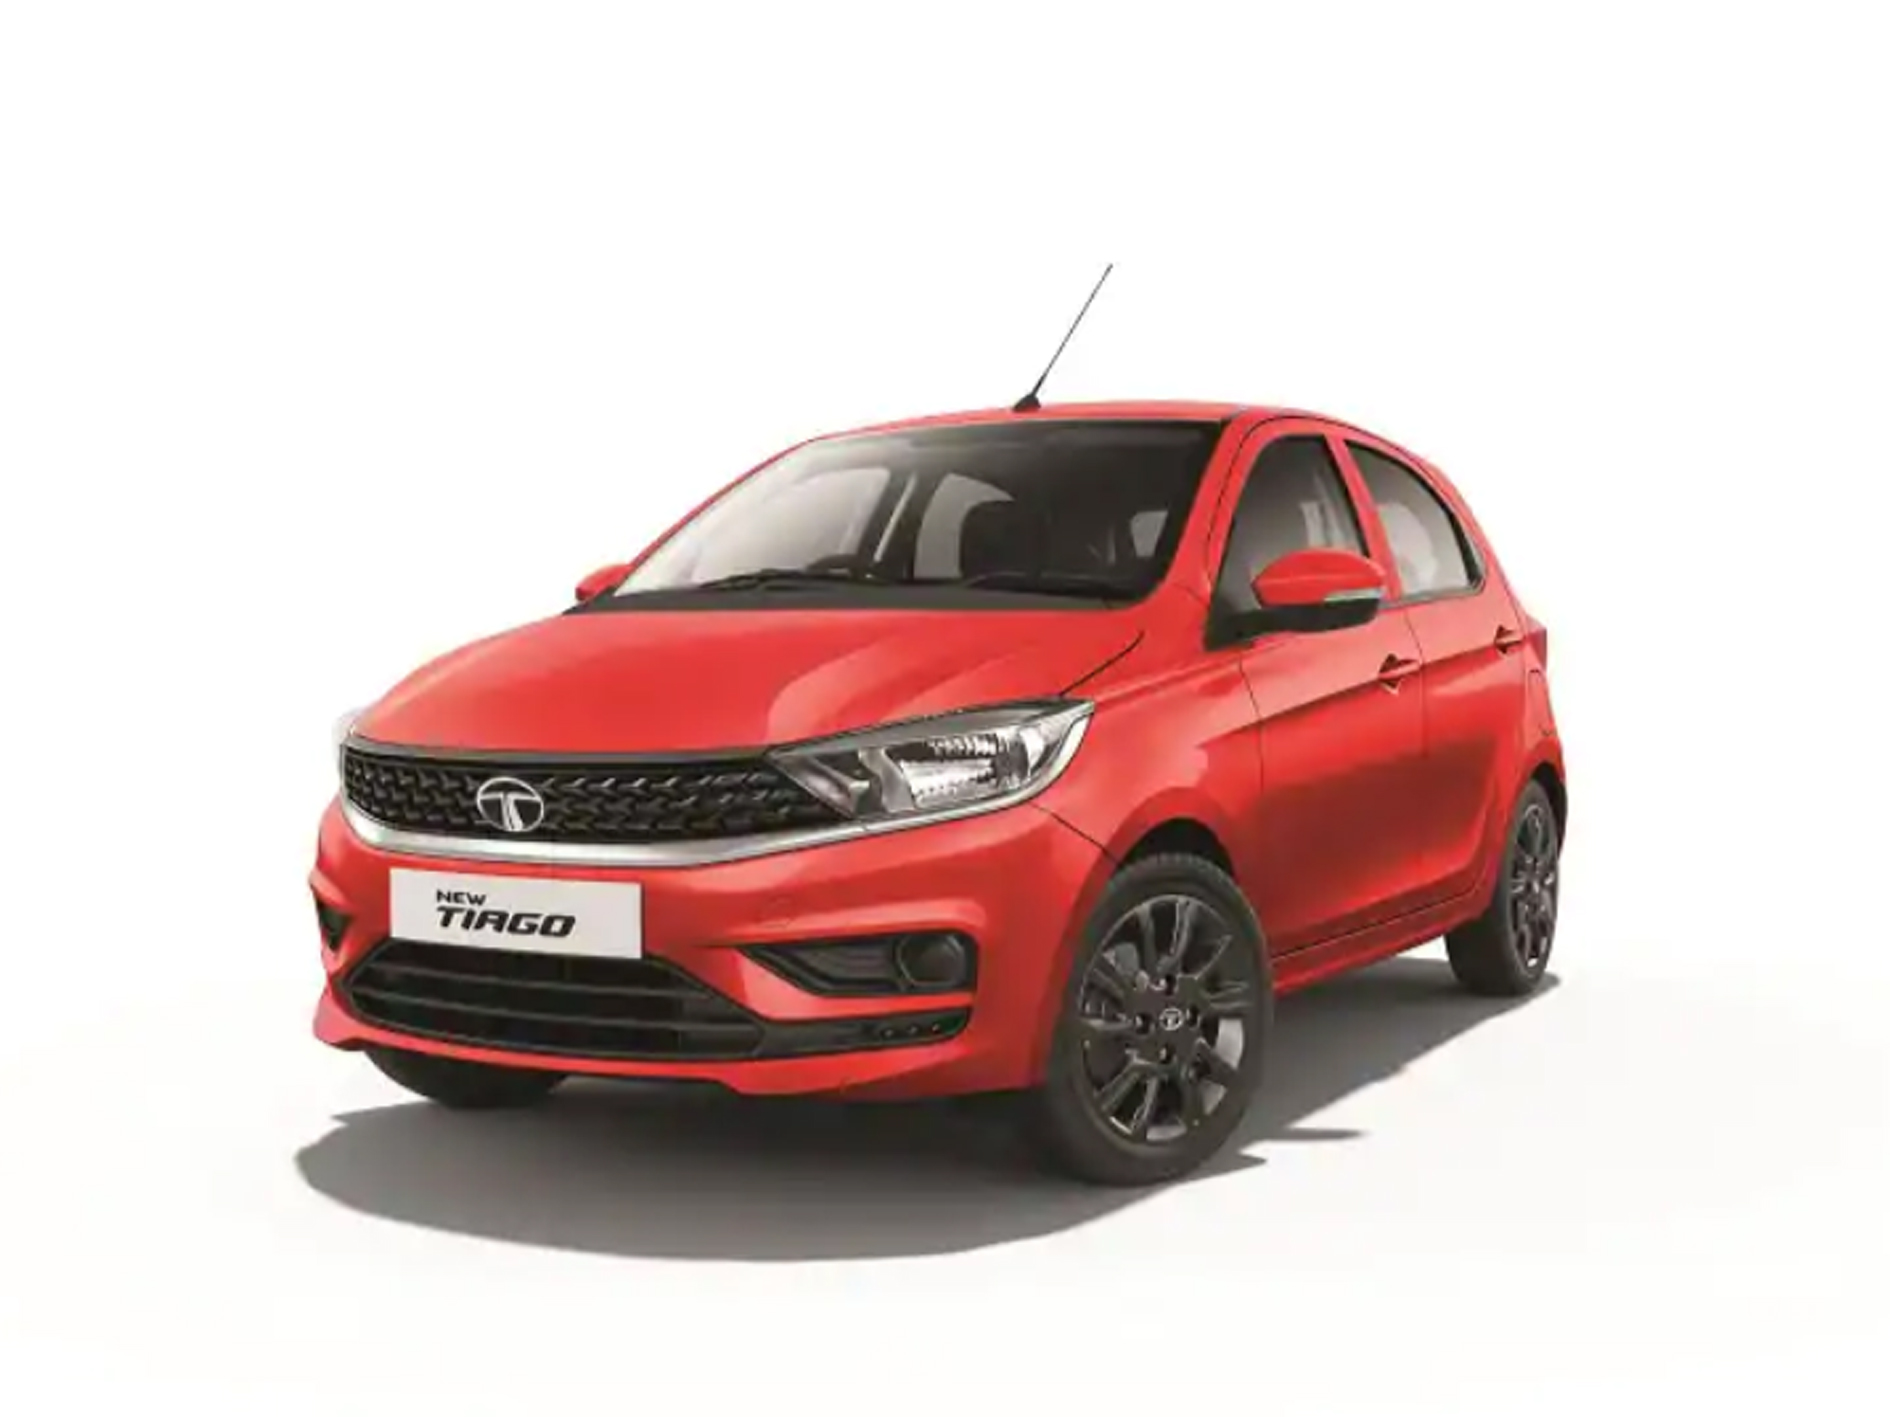 Tata Tiago Limited Edition Variant Launched In India At Rs 5.79 Lakhs